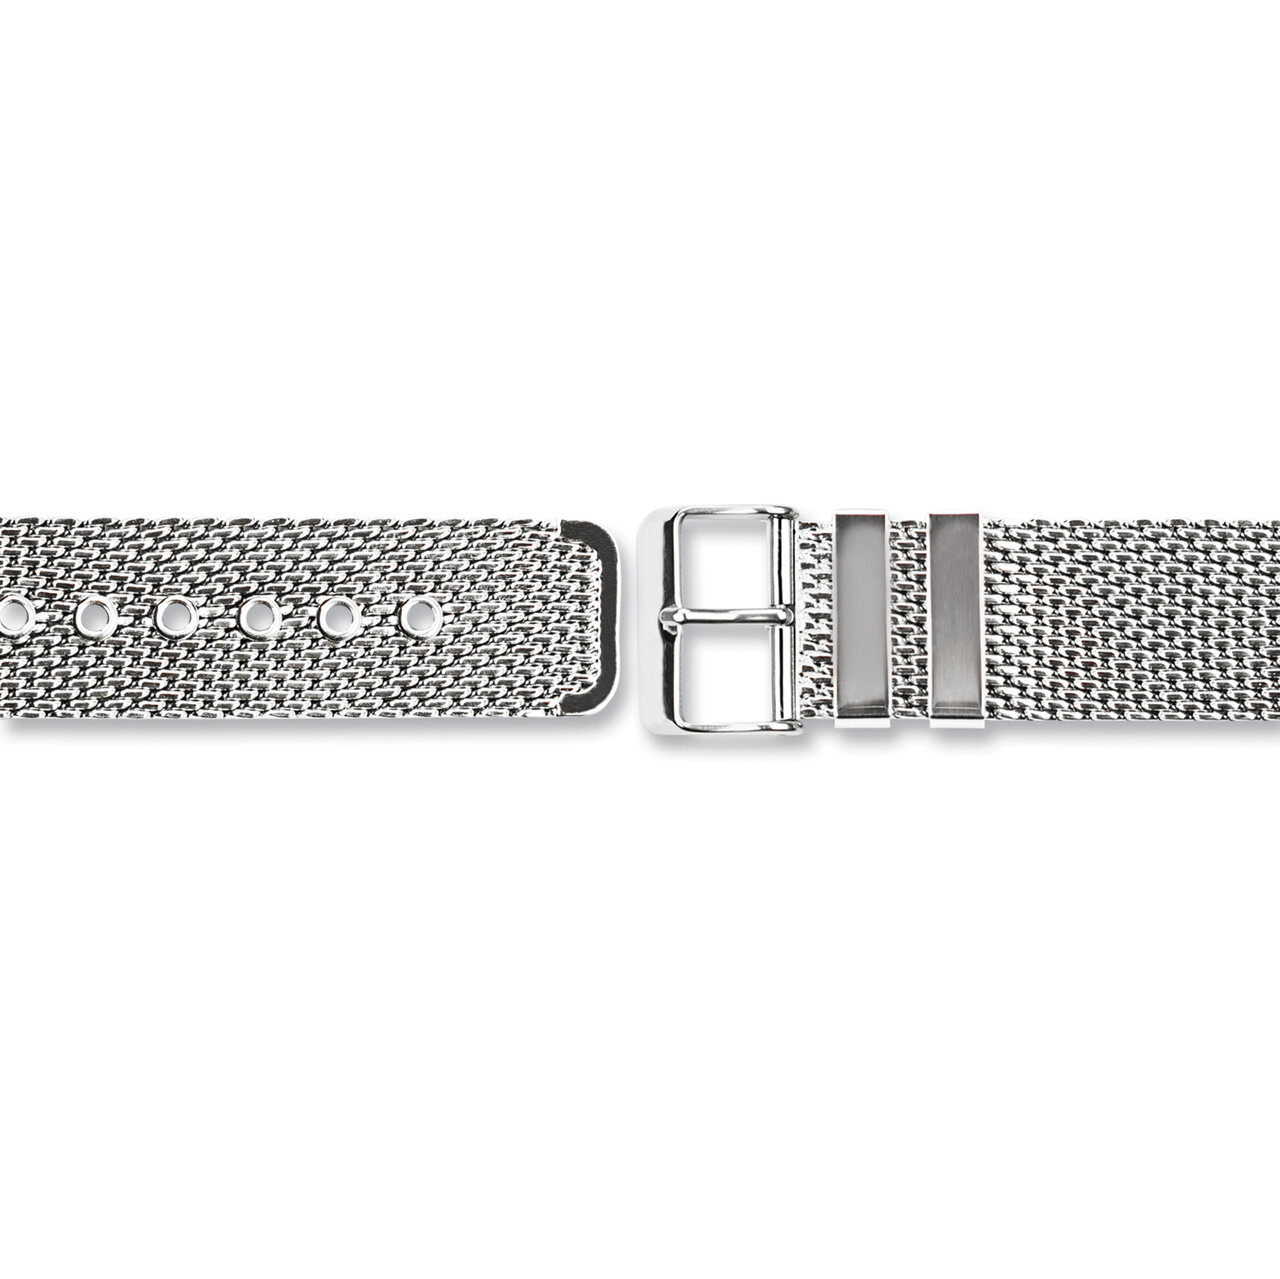 20mm Stainless Steel Mesh 2-Piece Watch Band BA413-20